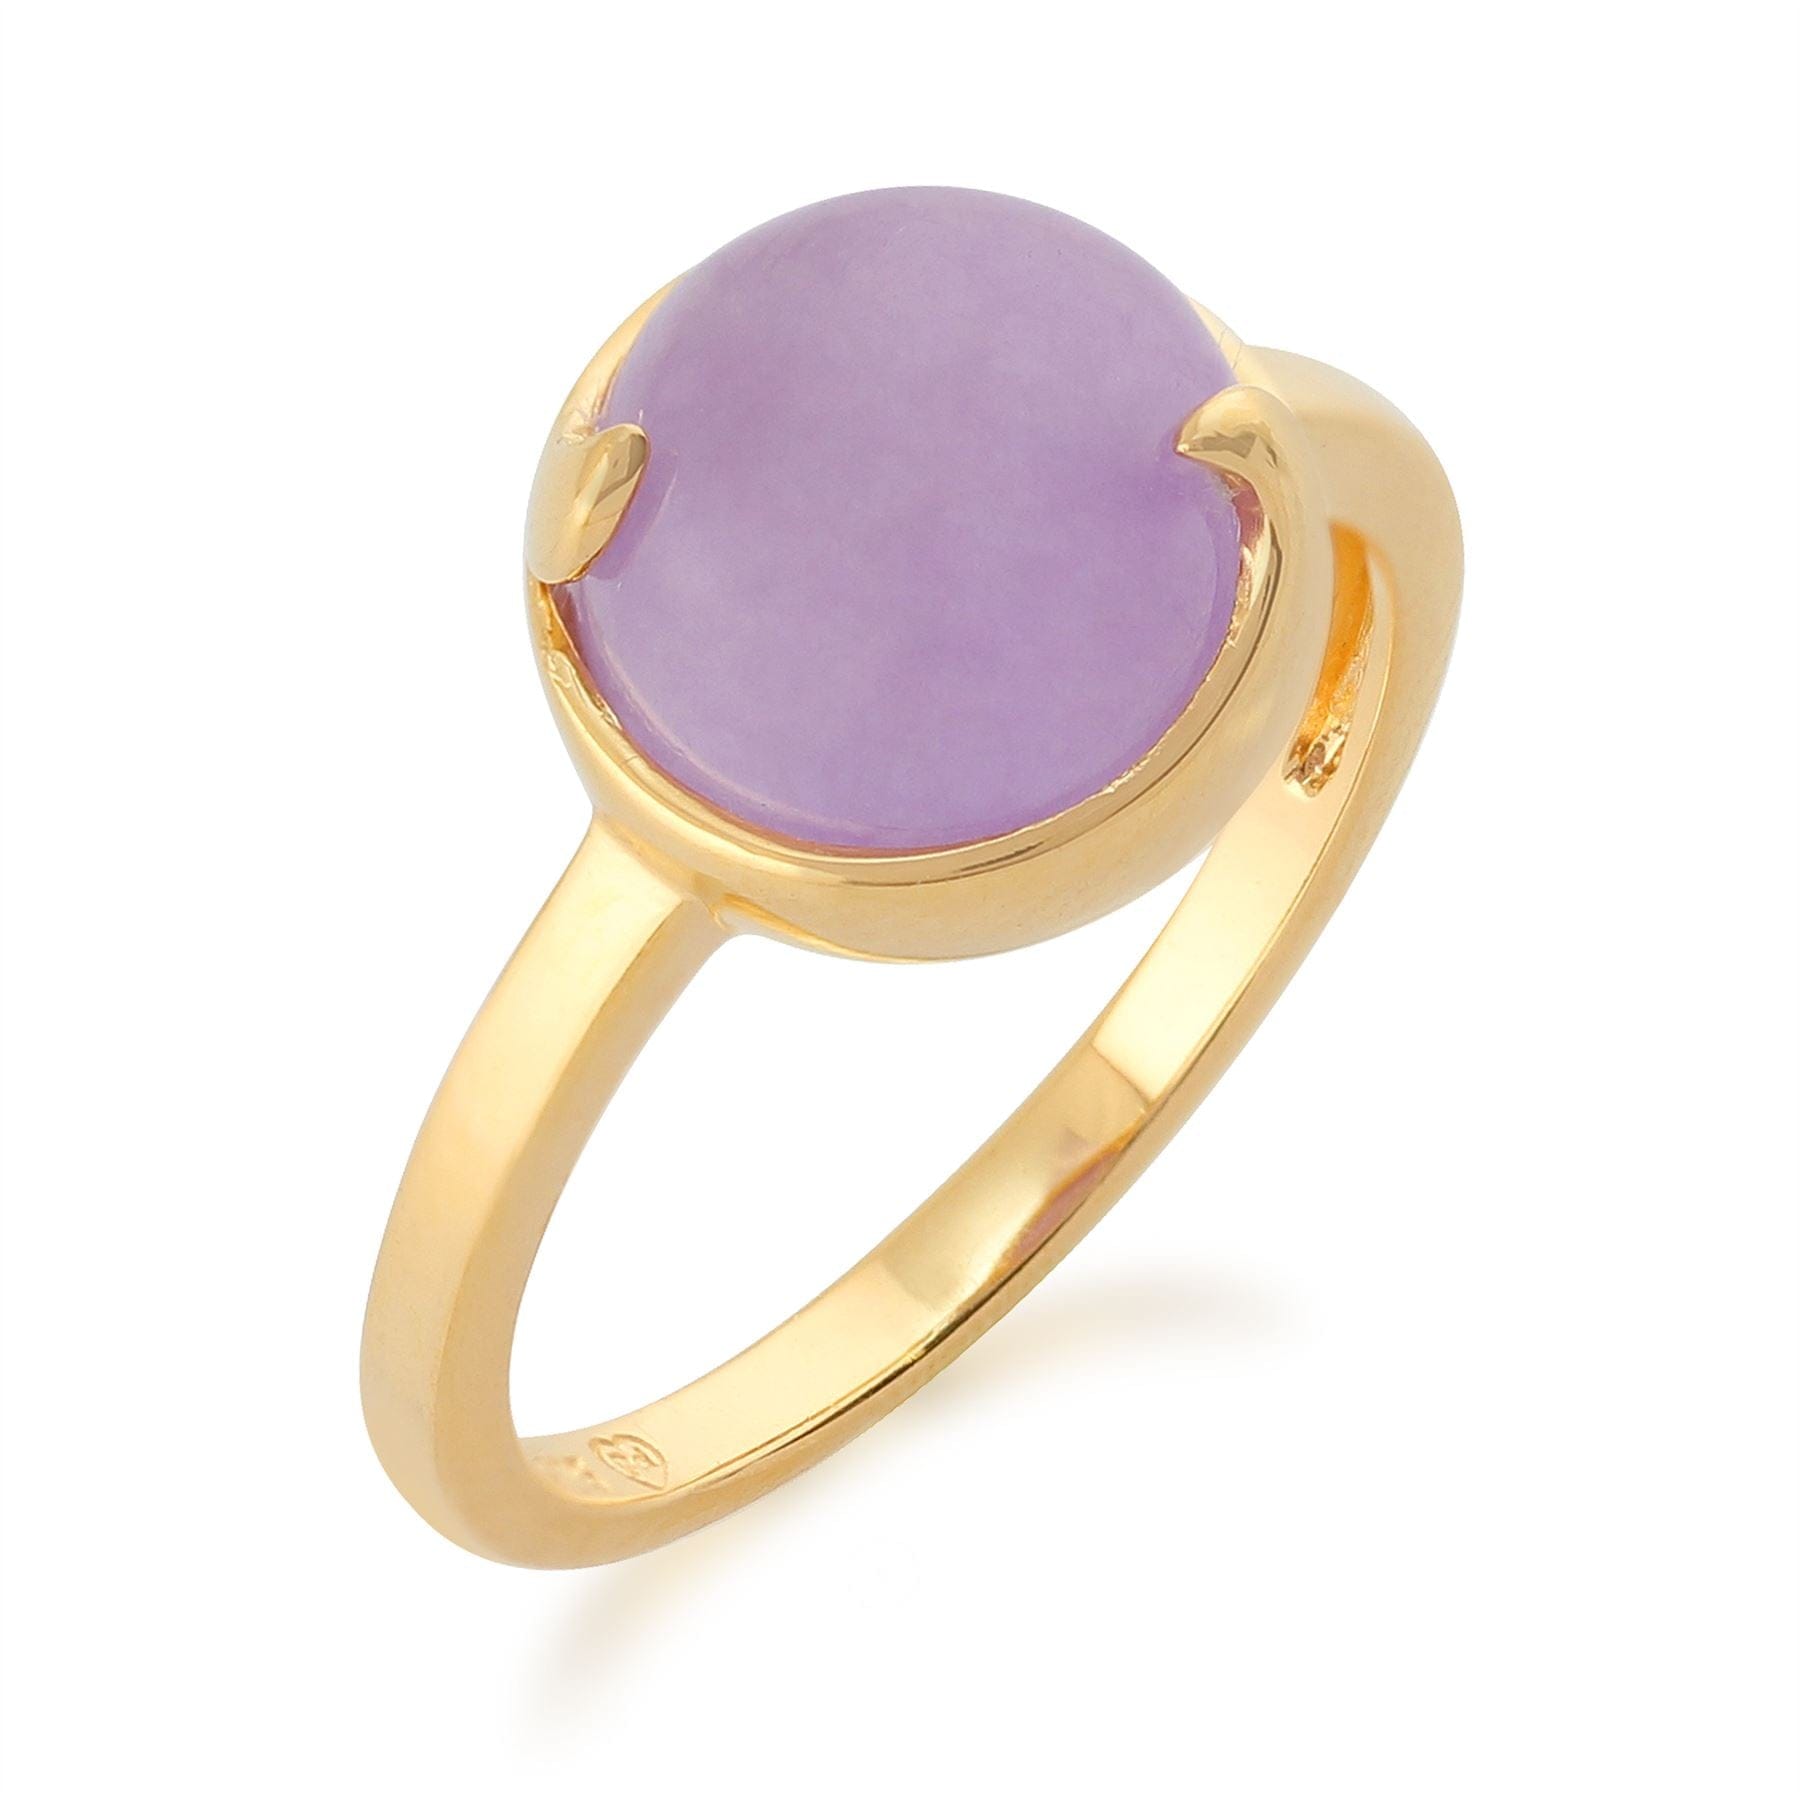 271R016603925 Lavender Jade 'Vita' Pastel Ring in 9ct Yellow Gold Plated Sterling Silver 2